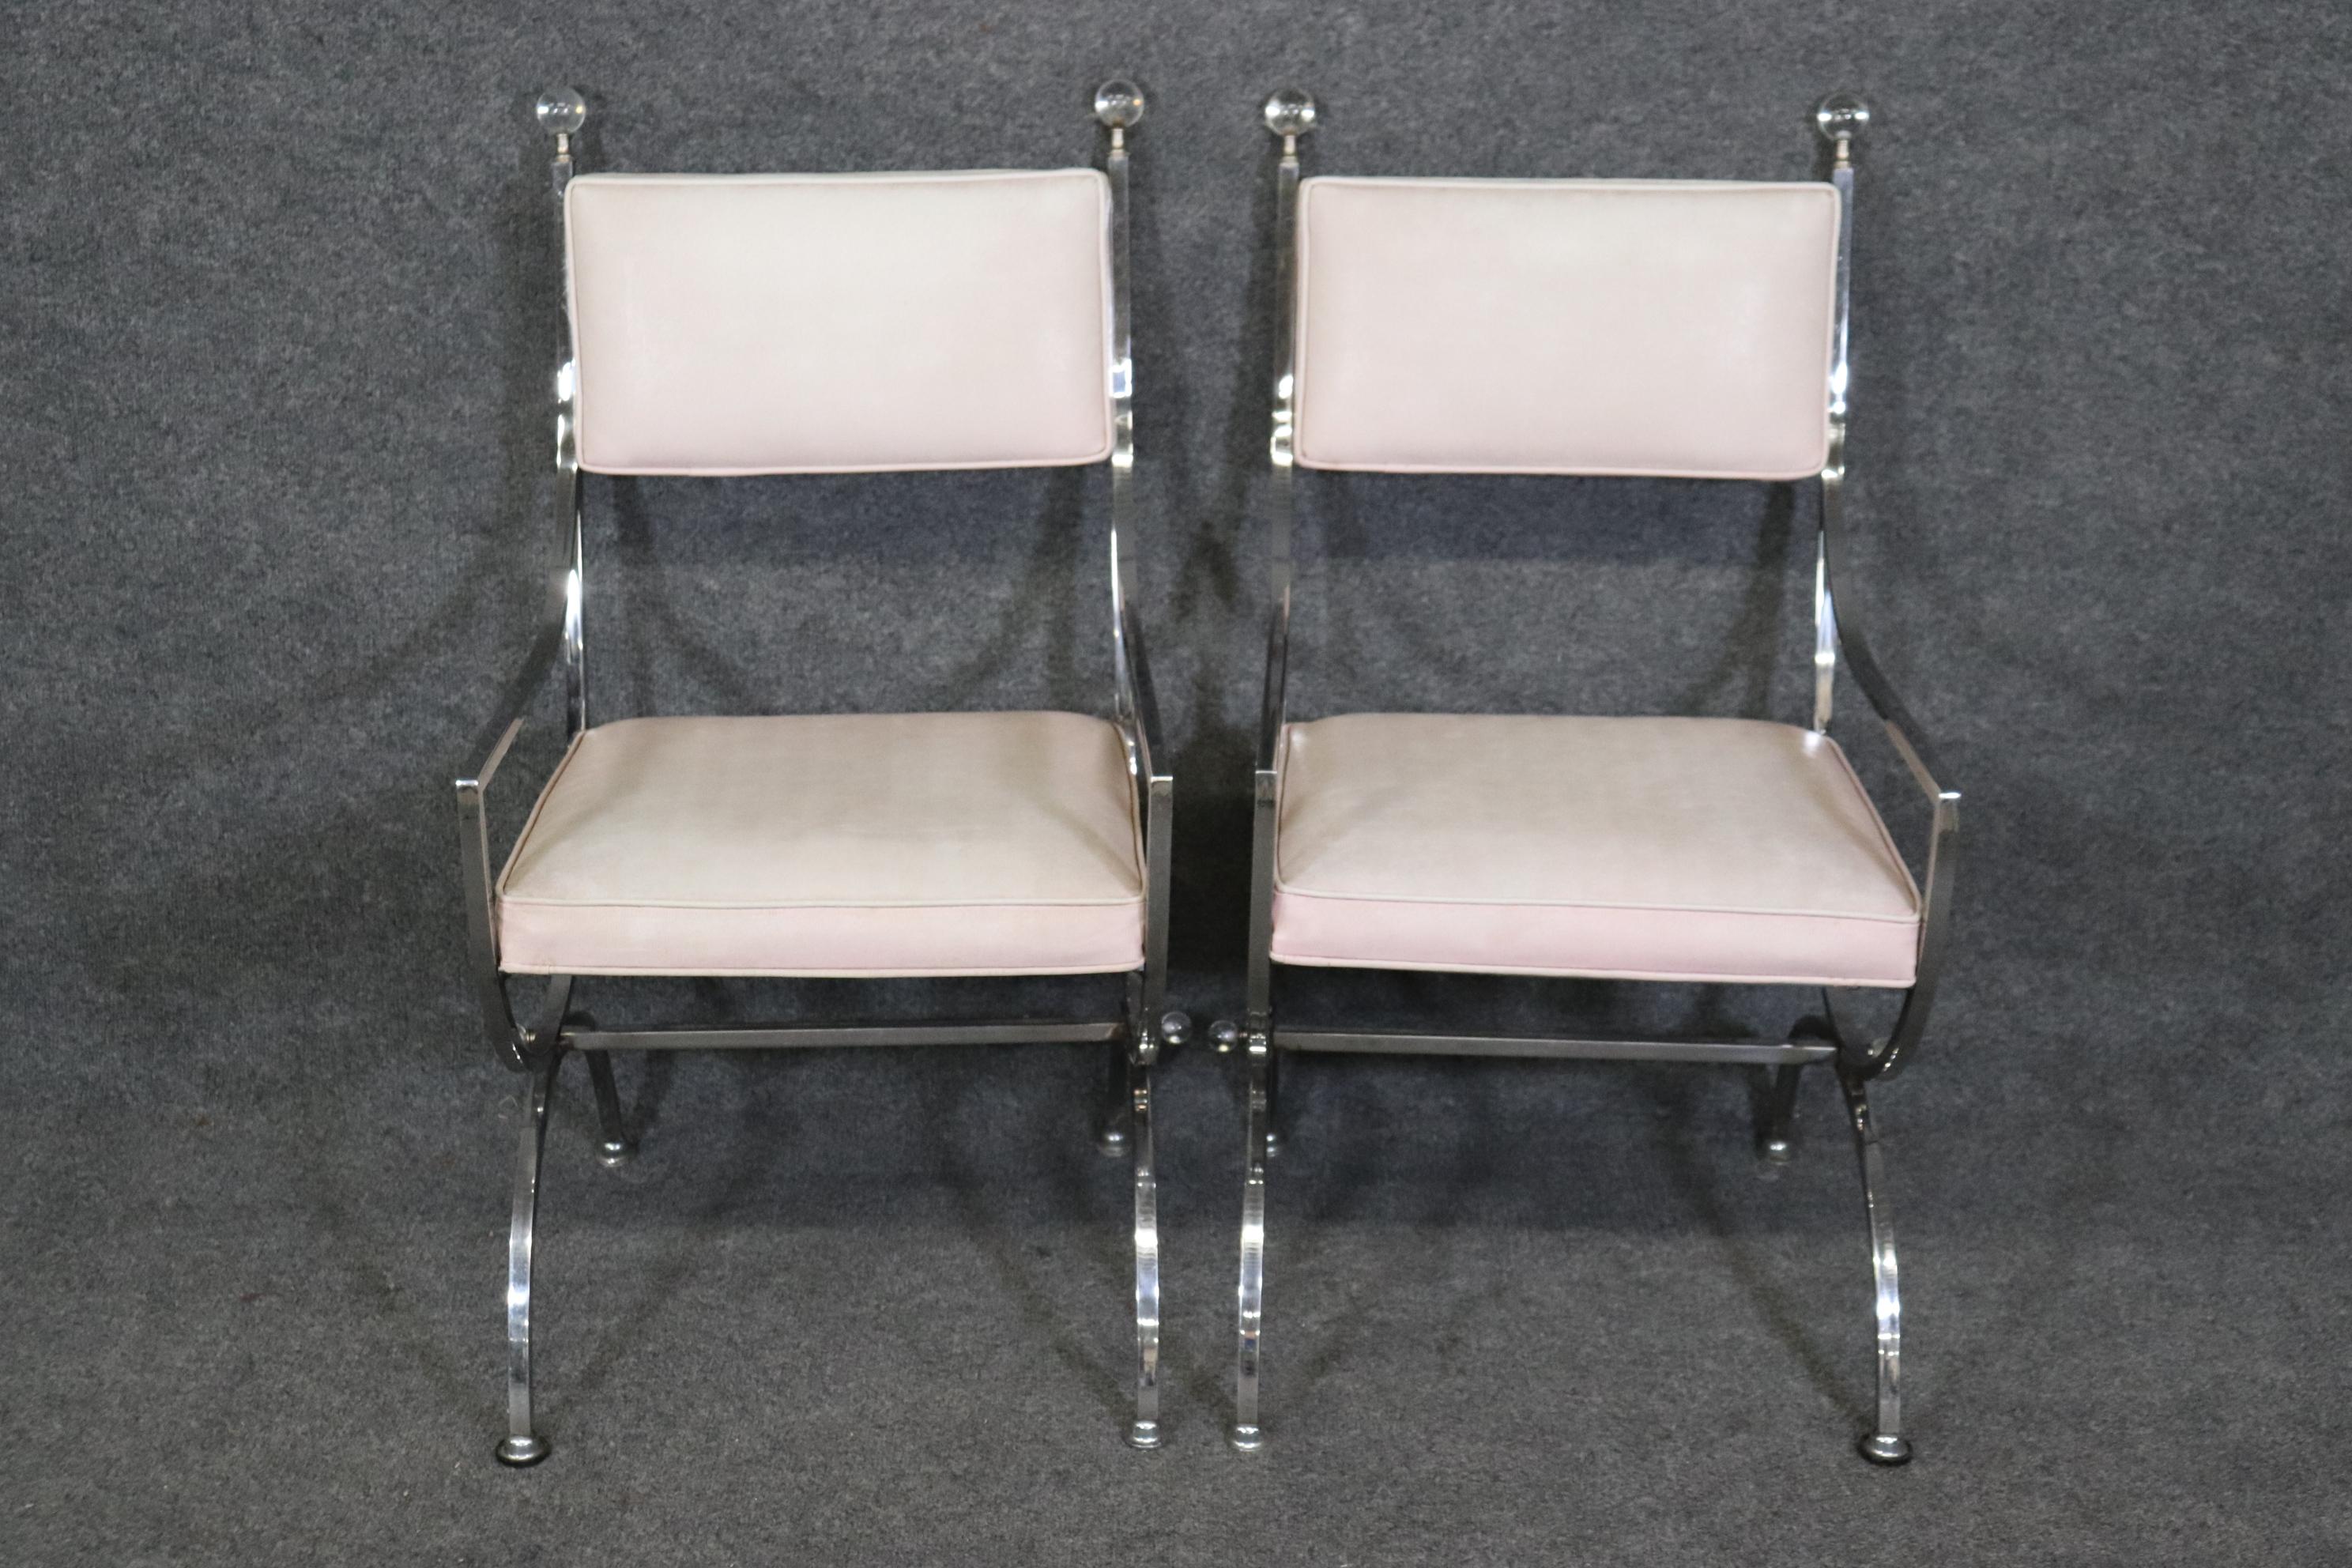 Dimensions- H: 35 3/4in W: 21 1/2in D: 23 3/4in SH: 17 3/4in 
This Pair of Jacques Adnet Style Chrome and Lucite Armchairs in the Hollywood Regency style are truly magnificent if you take a look at the photos provided you will see the lovely lucite